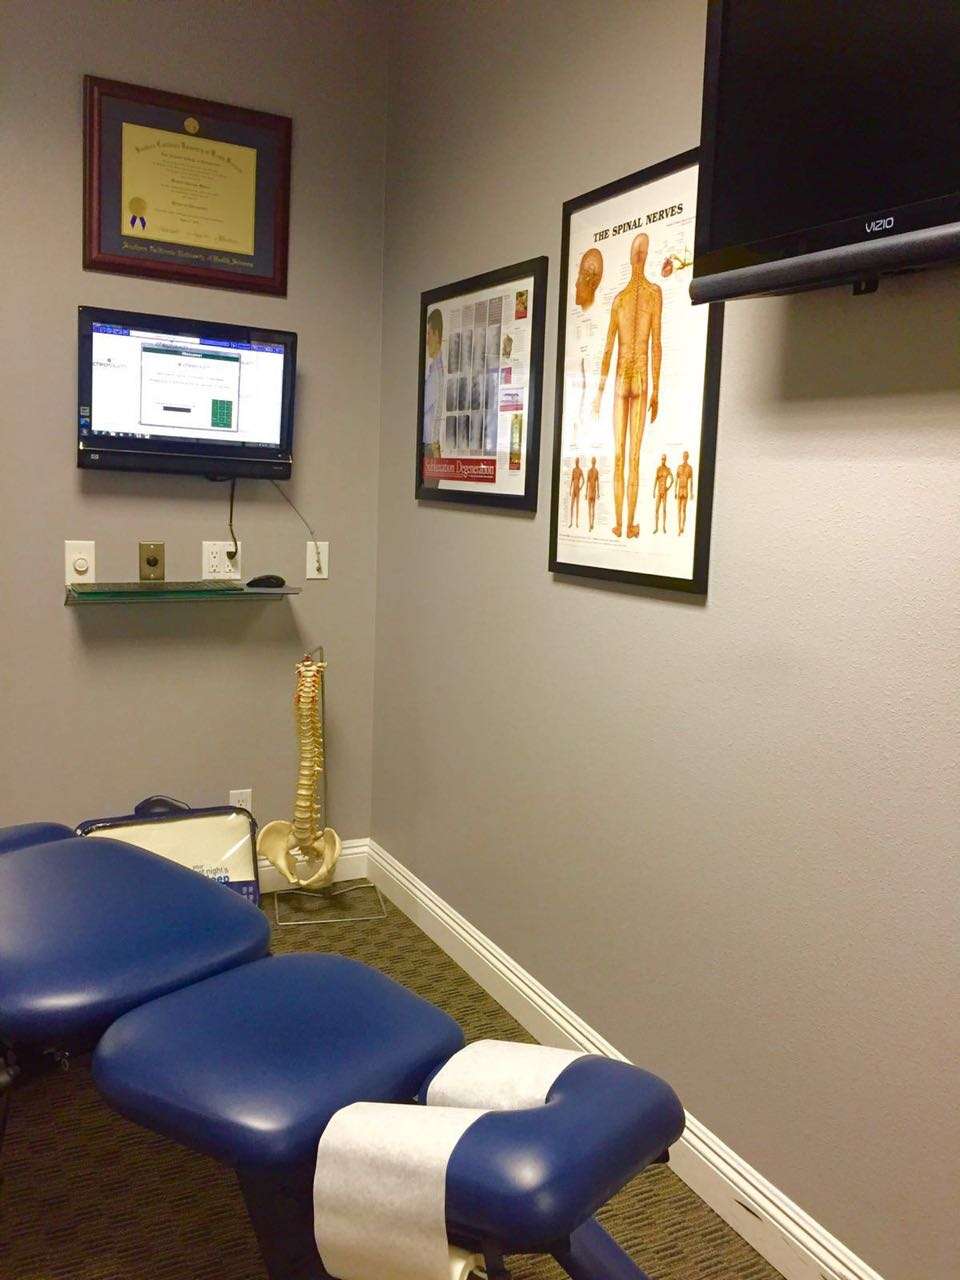 Twins Chiropractic and Physical Medicine | 3140 Bear St #200, Costa Mesa, CA 92626 | Phone: (714) 545-2005